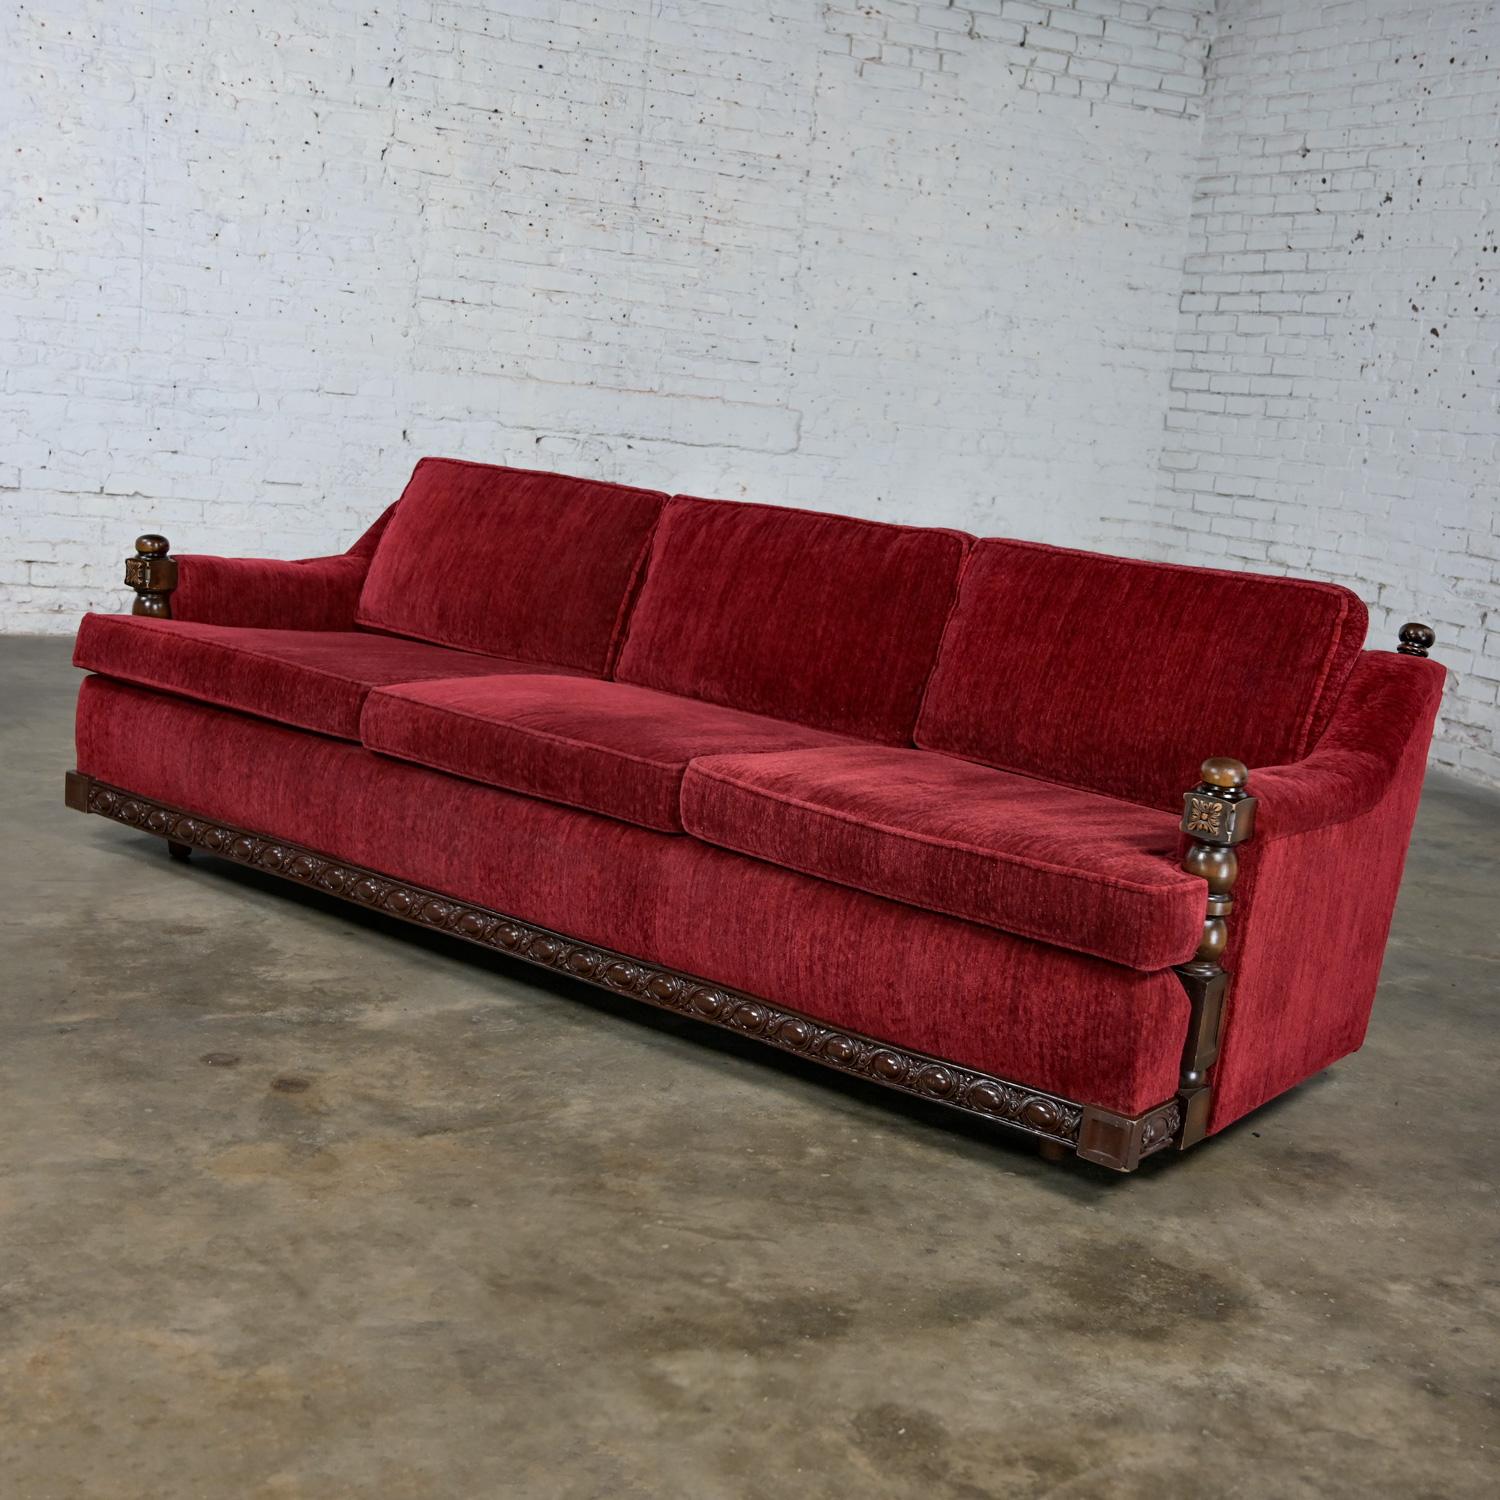 Gorgeous vintage Spanish Revival Rustic red chenille sofa in the style of Artes De Mexico Internationales. Comprised of a dark wood frame, three foam filled loose zippered seat cushions, and three loose zippered Dacron wrapped foam back cushions.